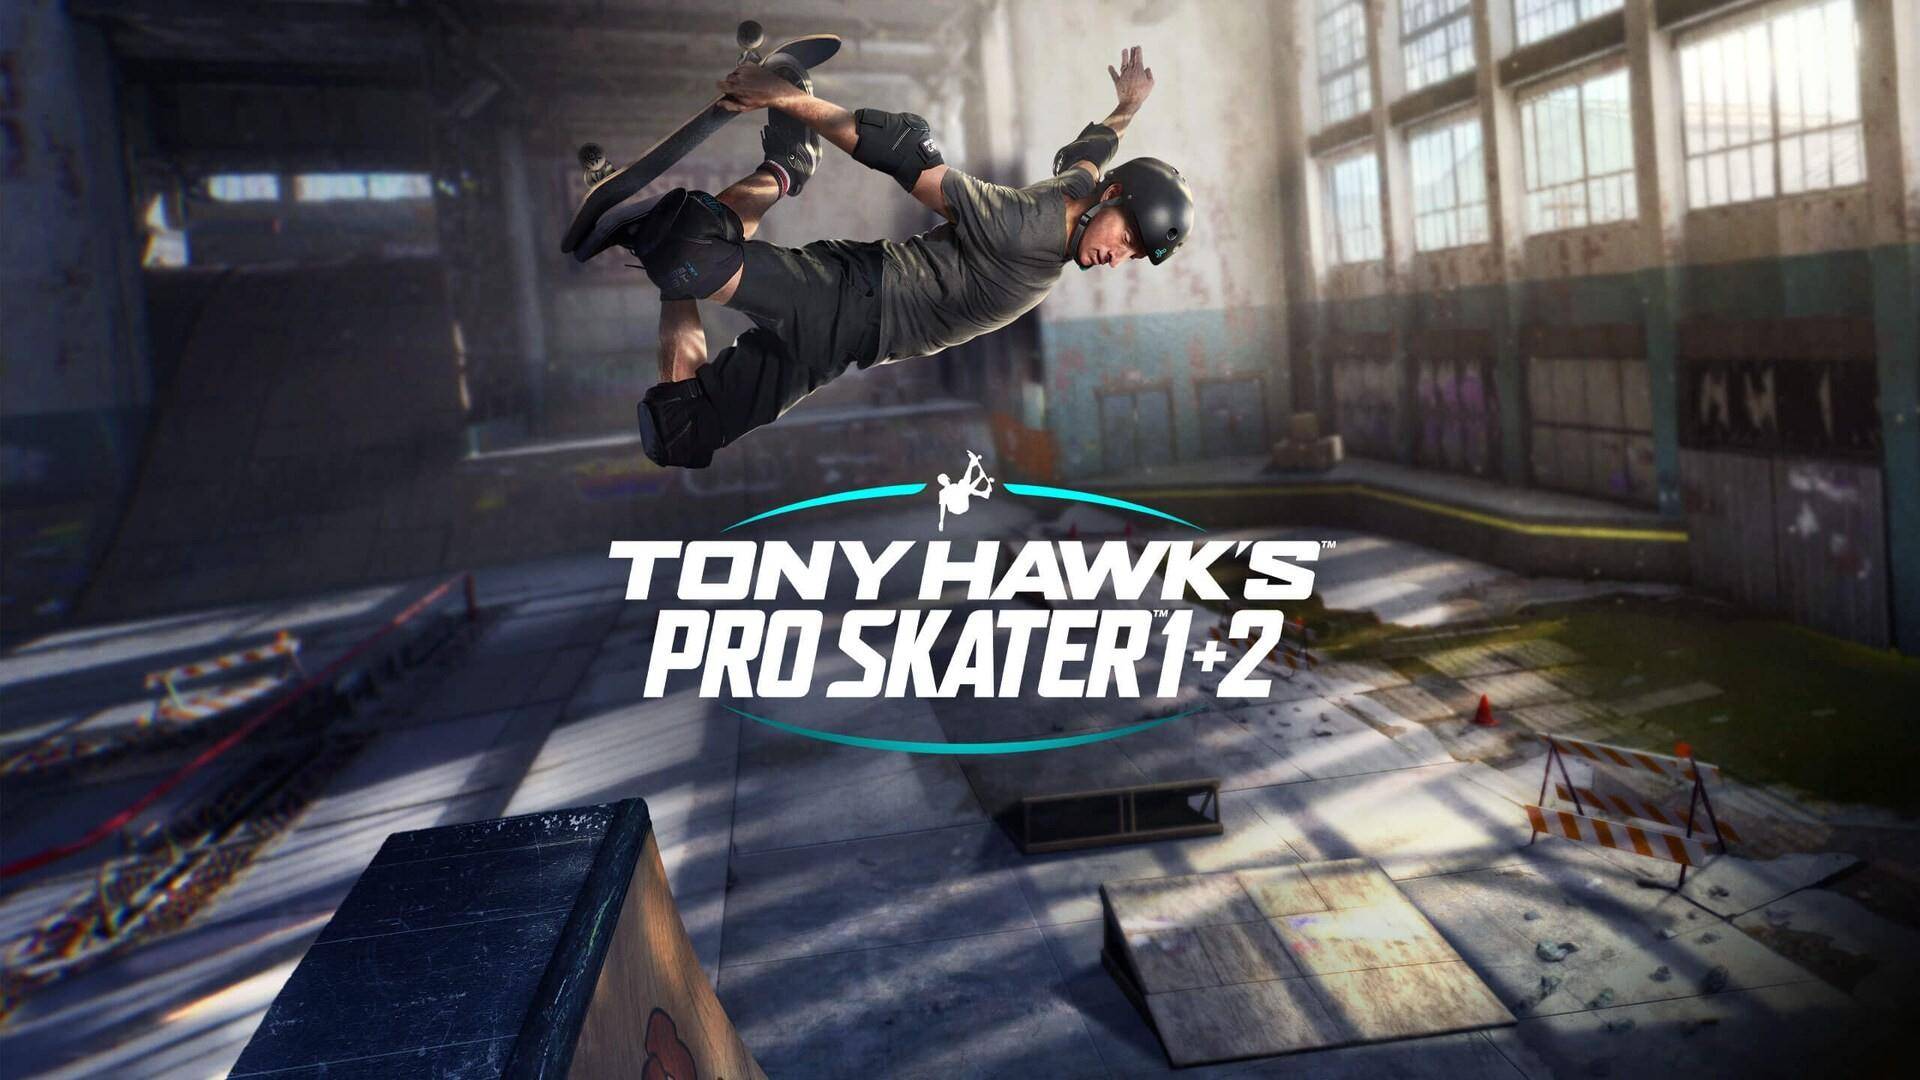 There's a Tony Hawk’s Pro Skater 1 + 2 free trial available